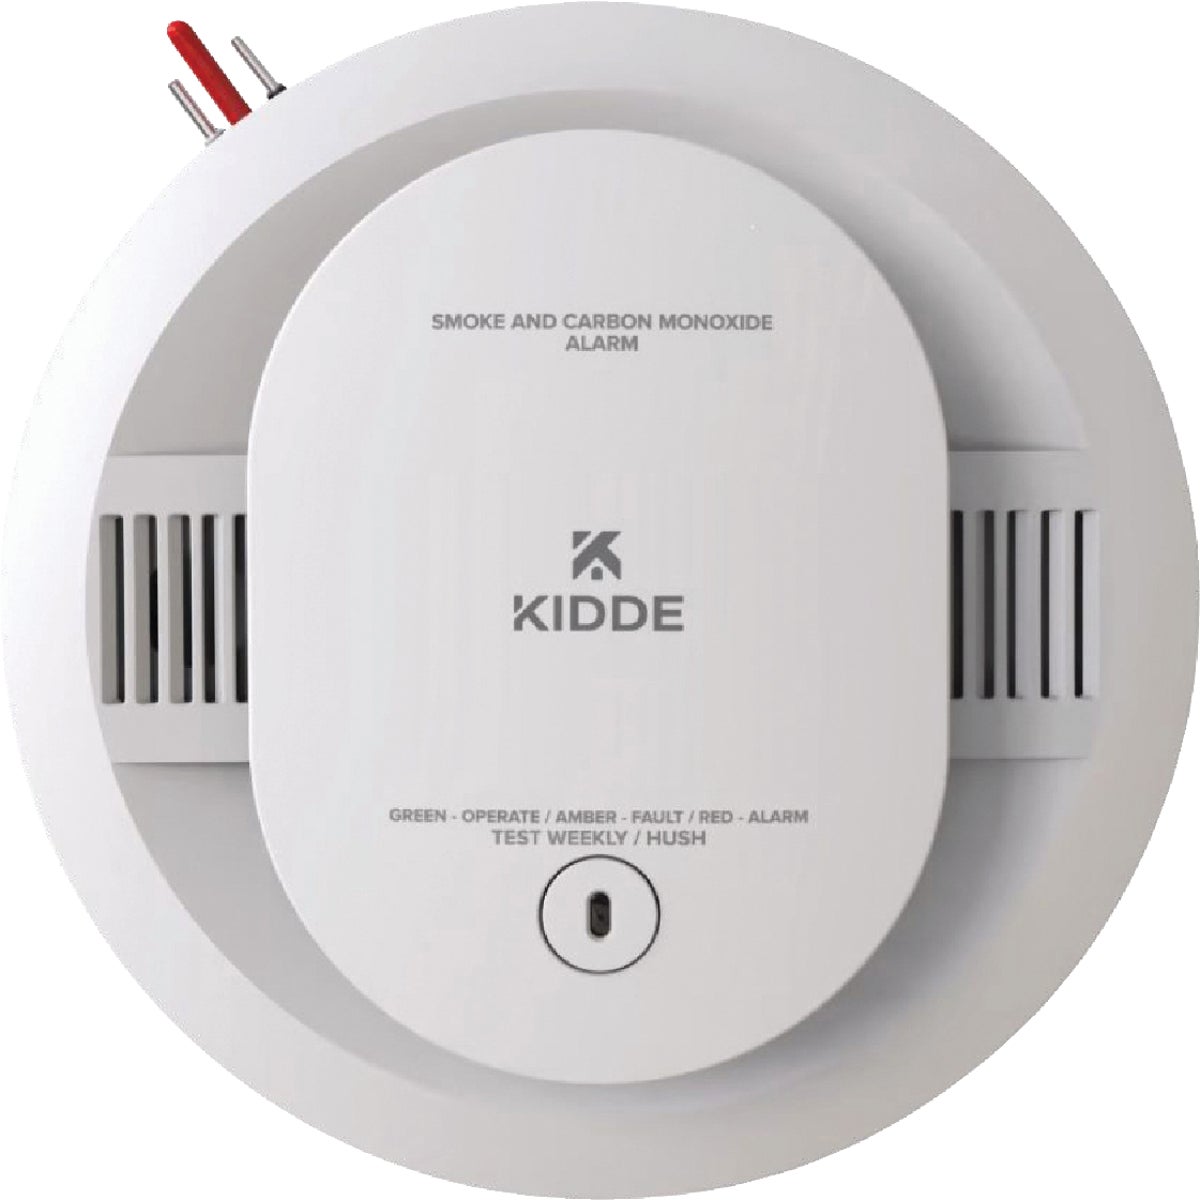 Item 545613, Hardwired smoke and carbon monoxide detector.